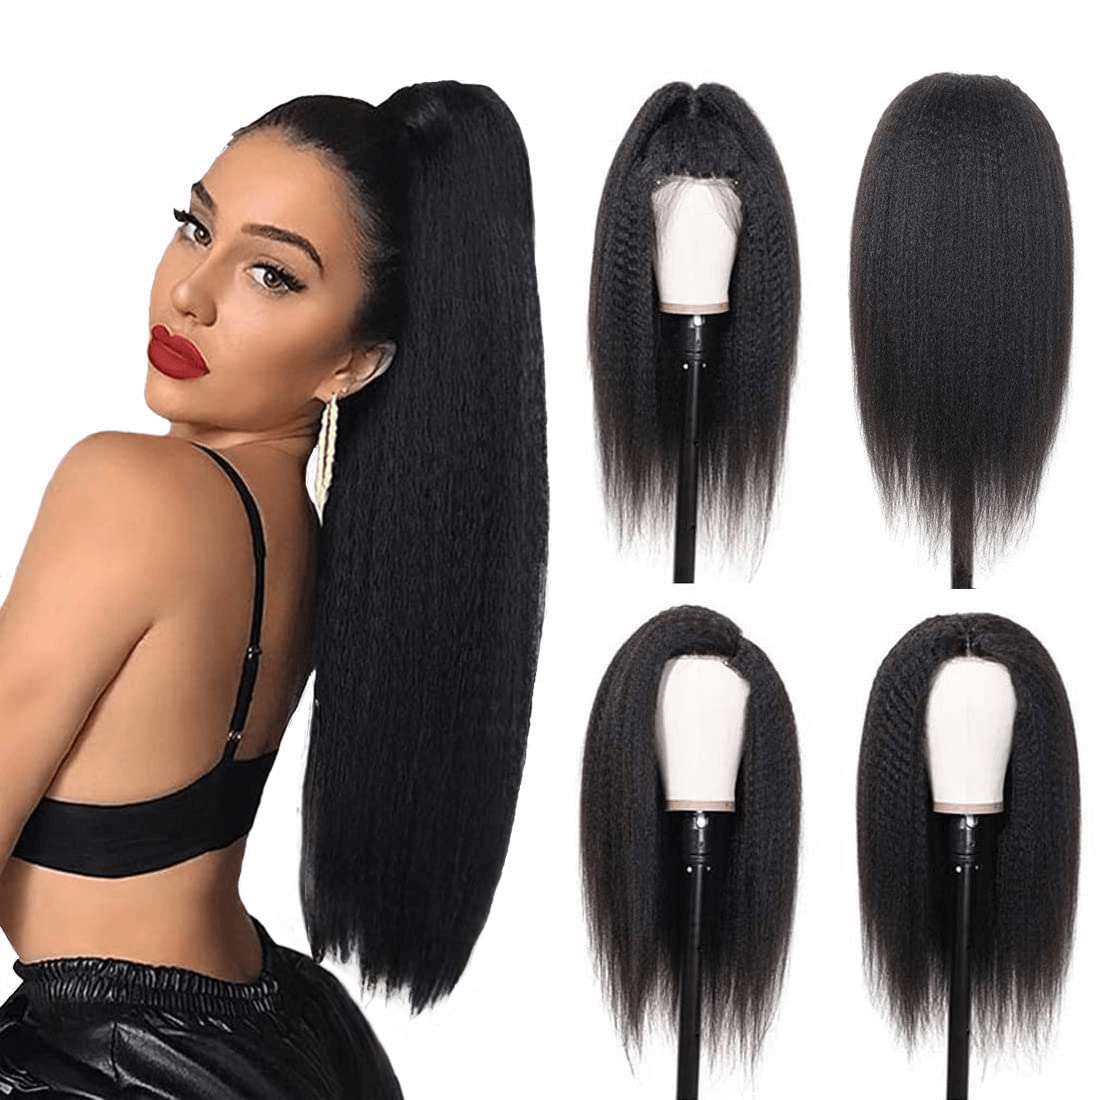 Wesface Full Lace Frontal Wig Kinky Straight Lace Front Wig Human Hair Pre Plucked 180 Density Yaki Straight Transparent Lace Wig 12A Brazilian Virgin Human Hair Wigs for Black Women